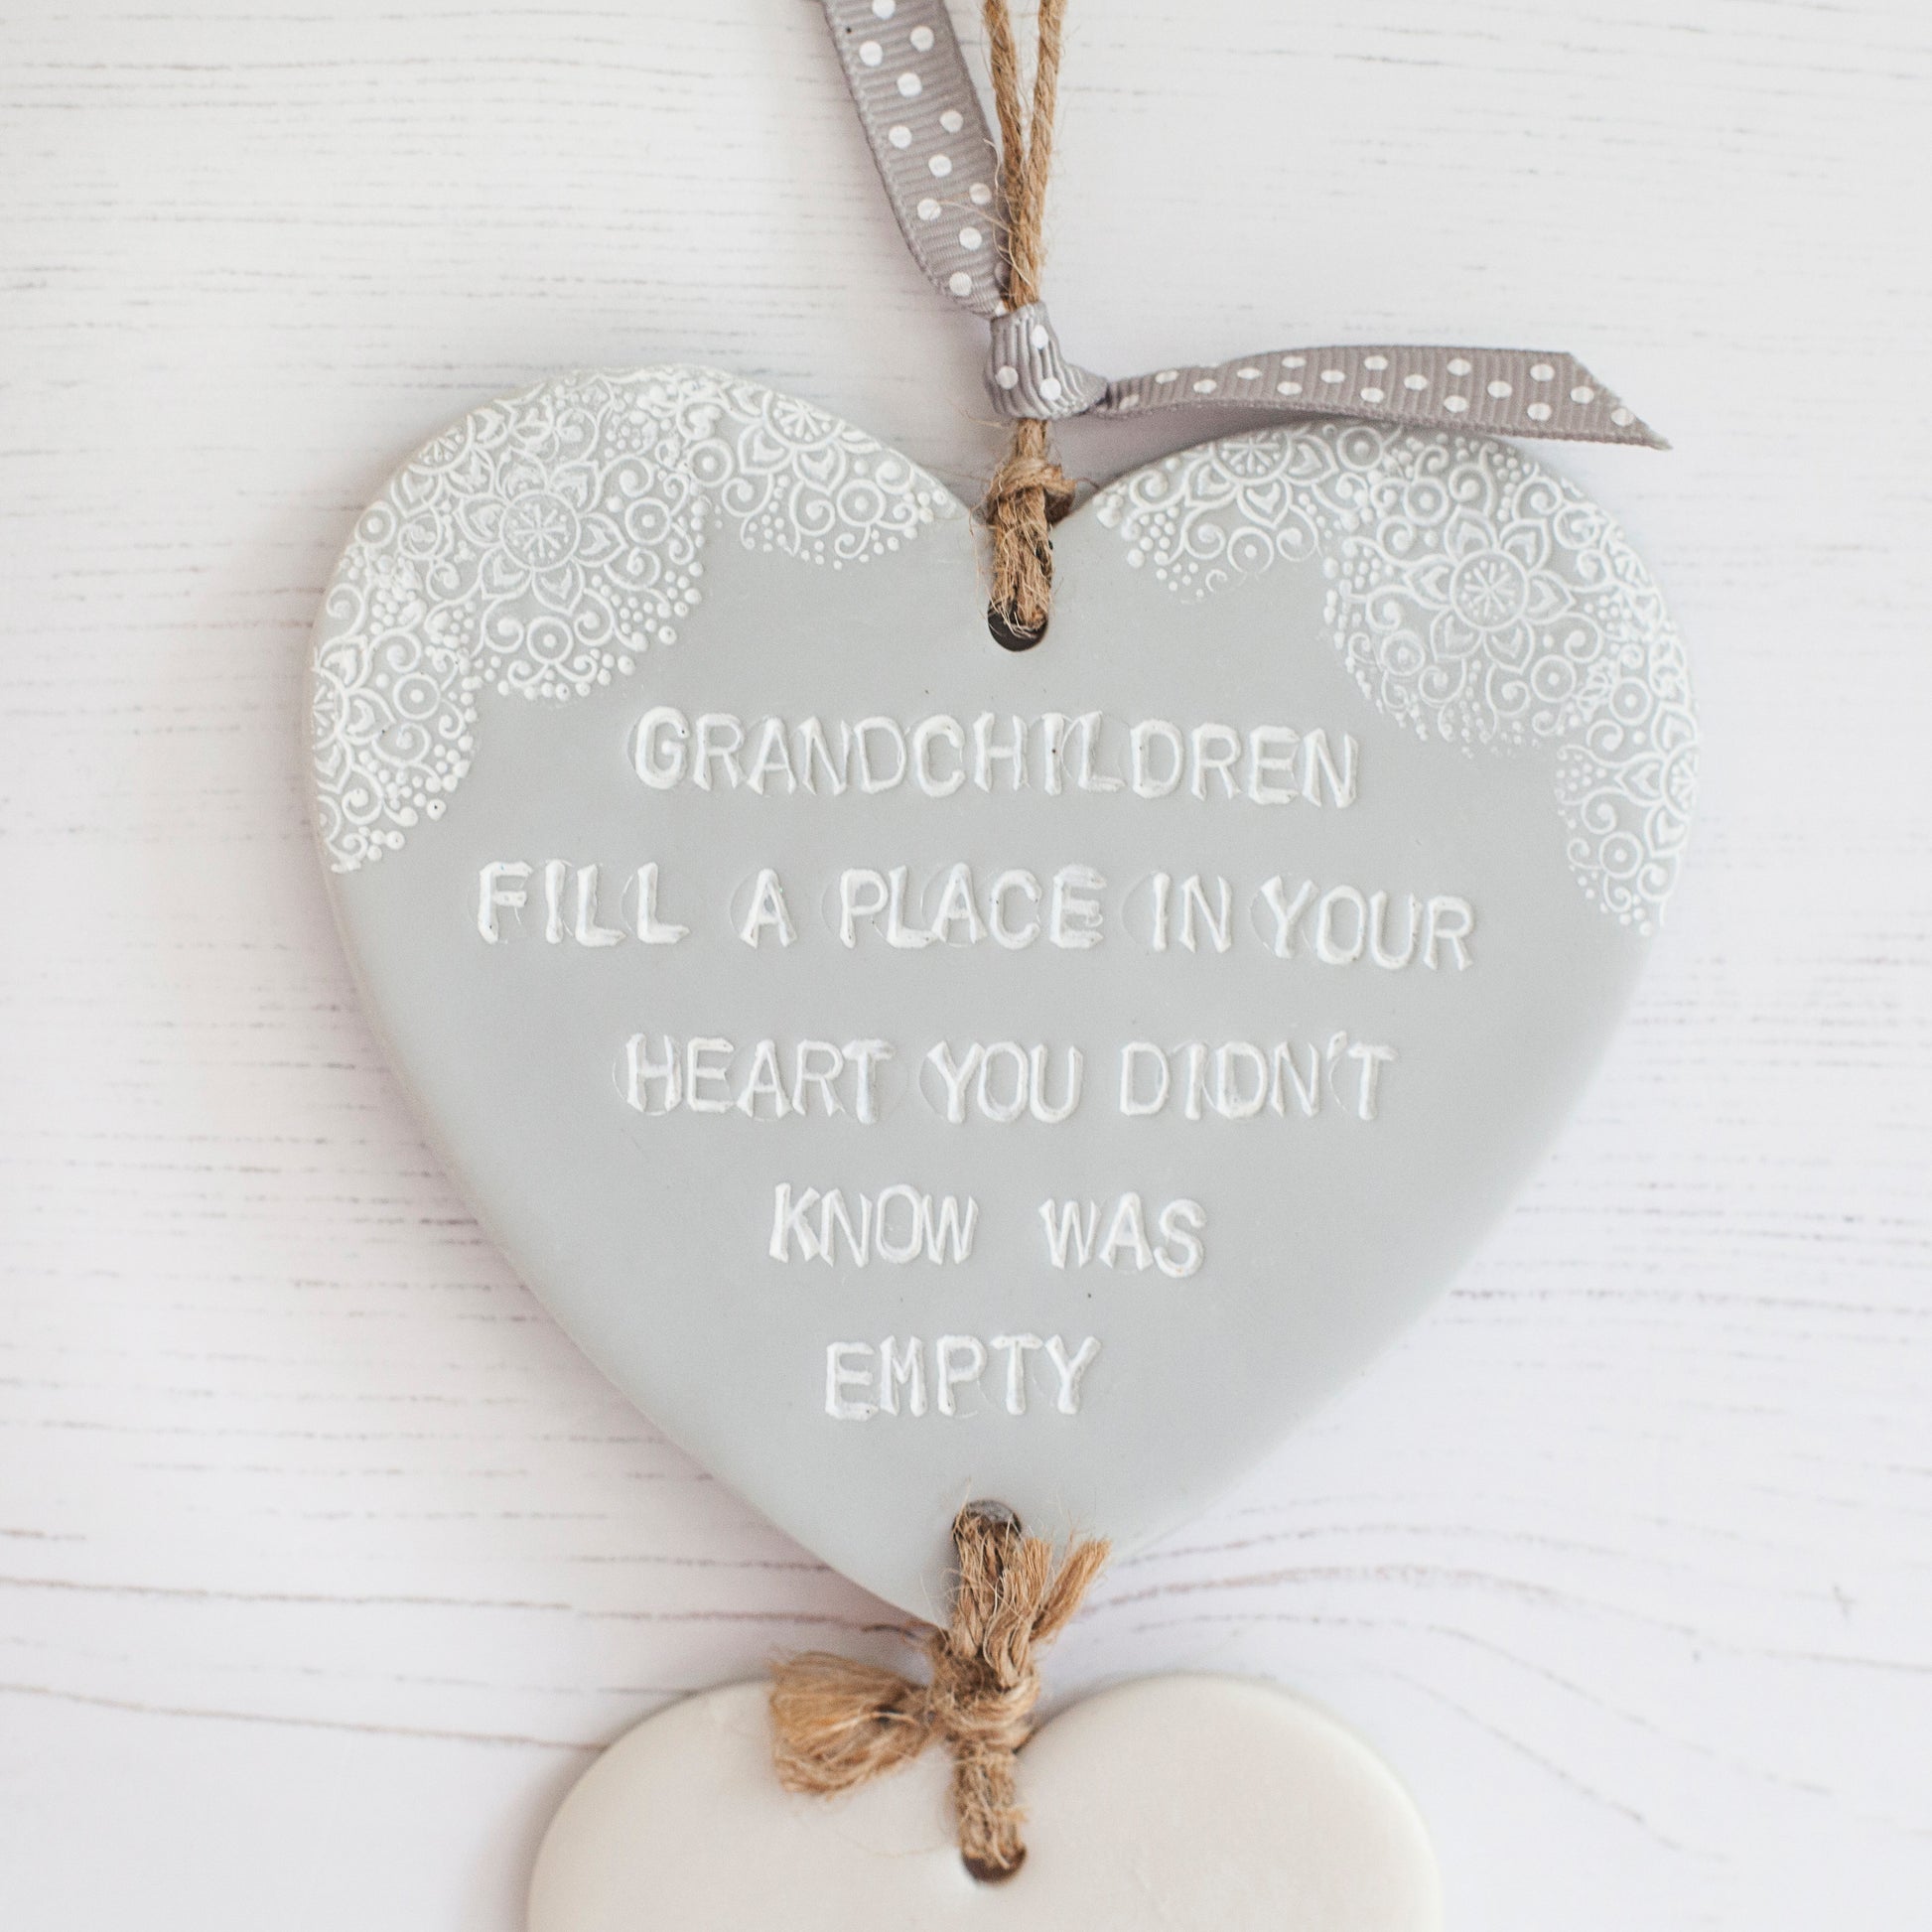 Grandparent keepsake with a large grey polymer clay heart with a quote “Grandchildren fill a place in your heart you didn’t know was empty”